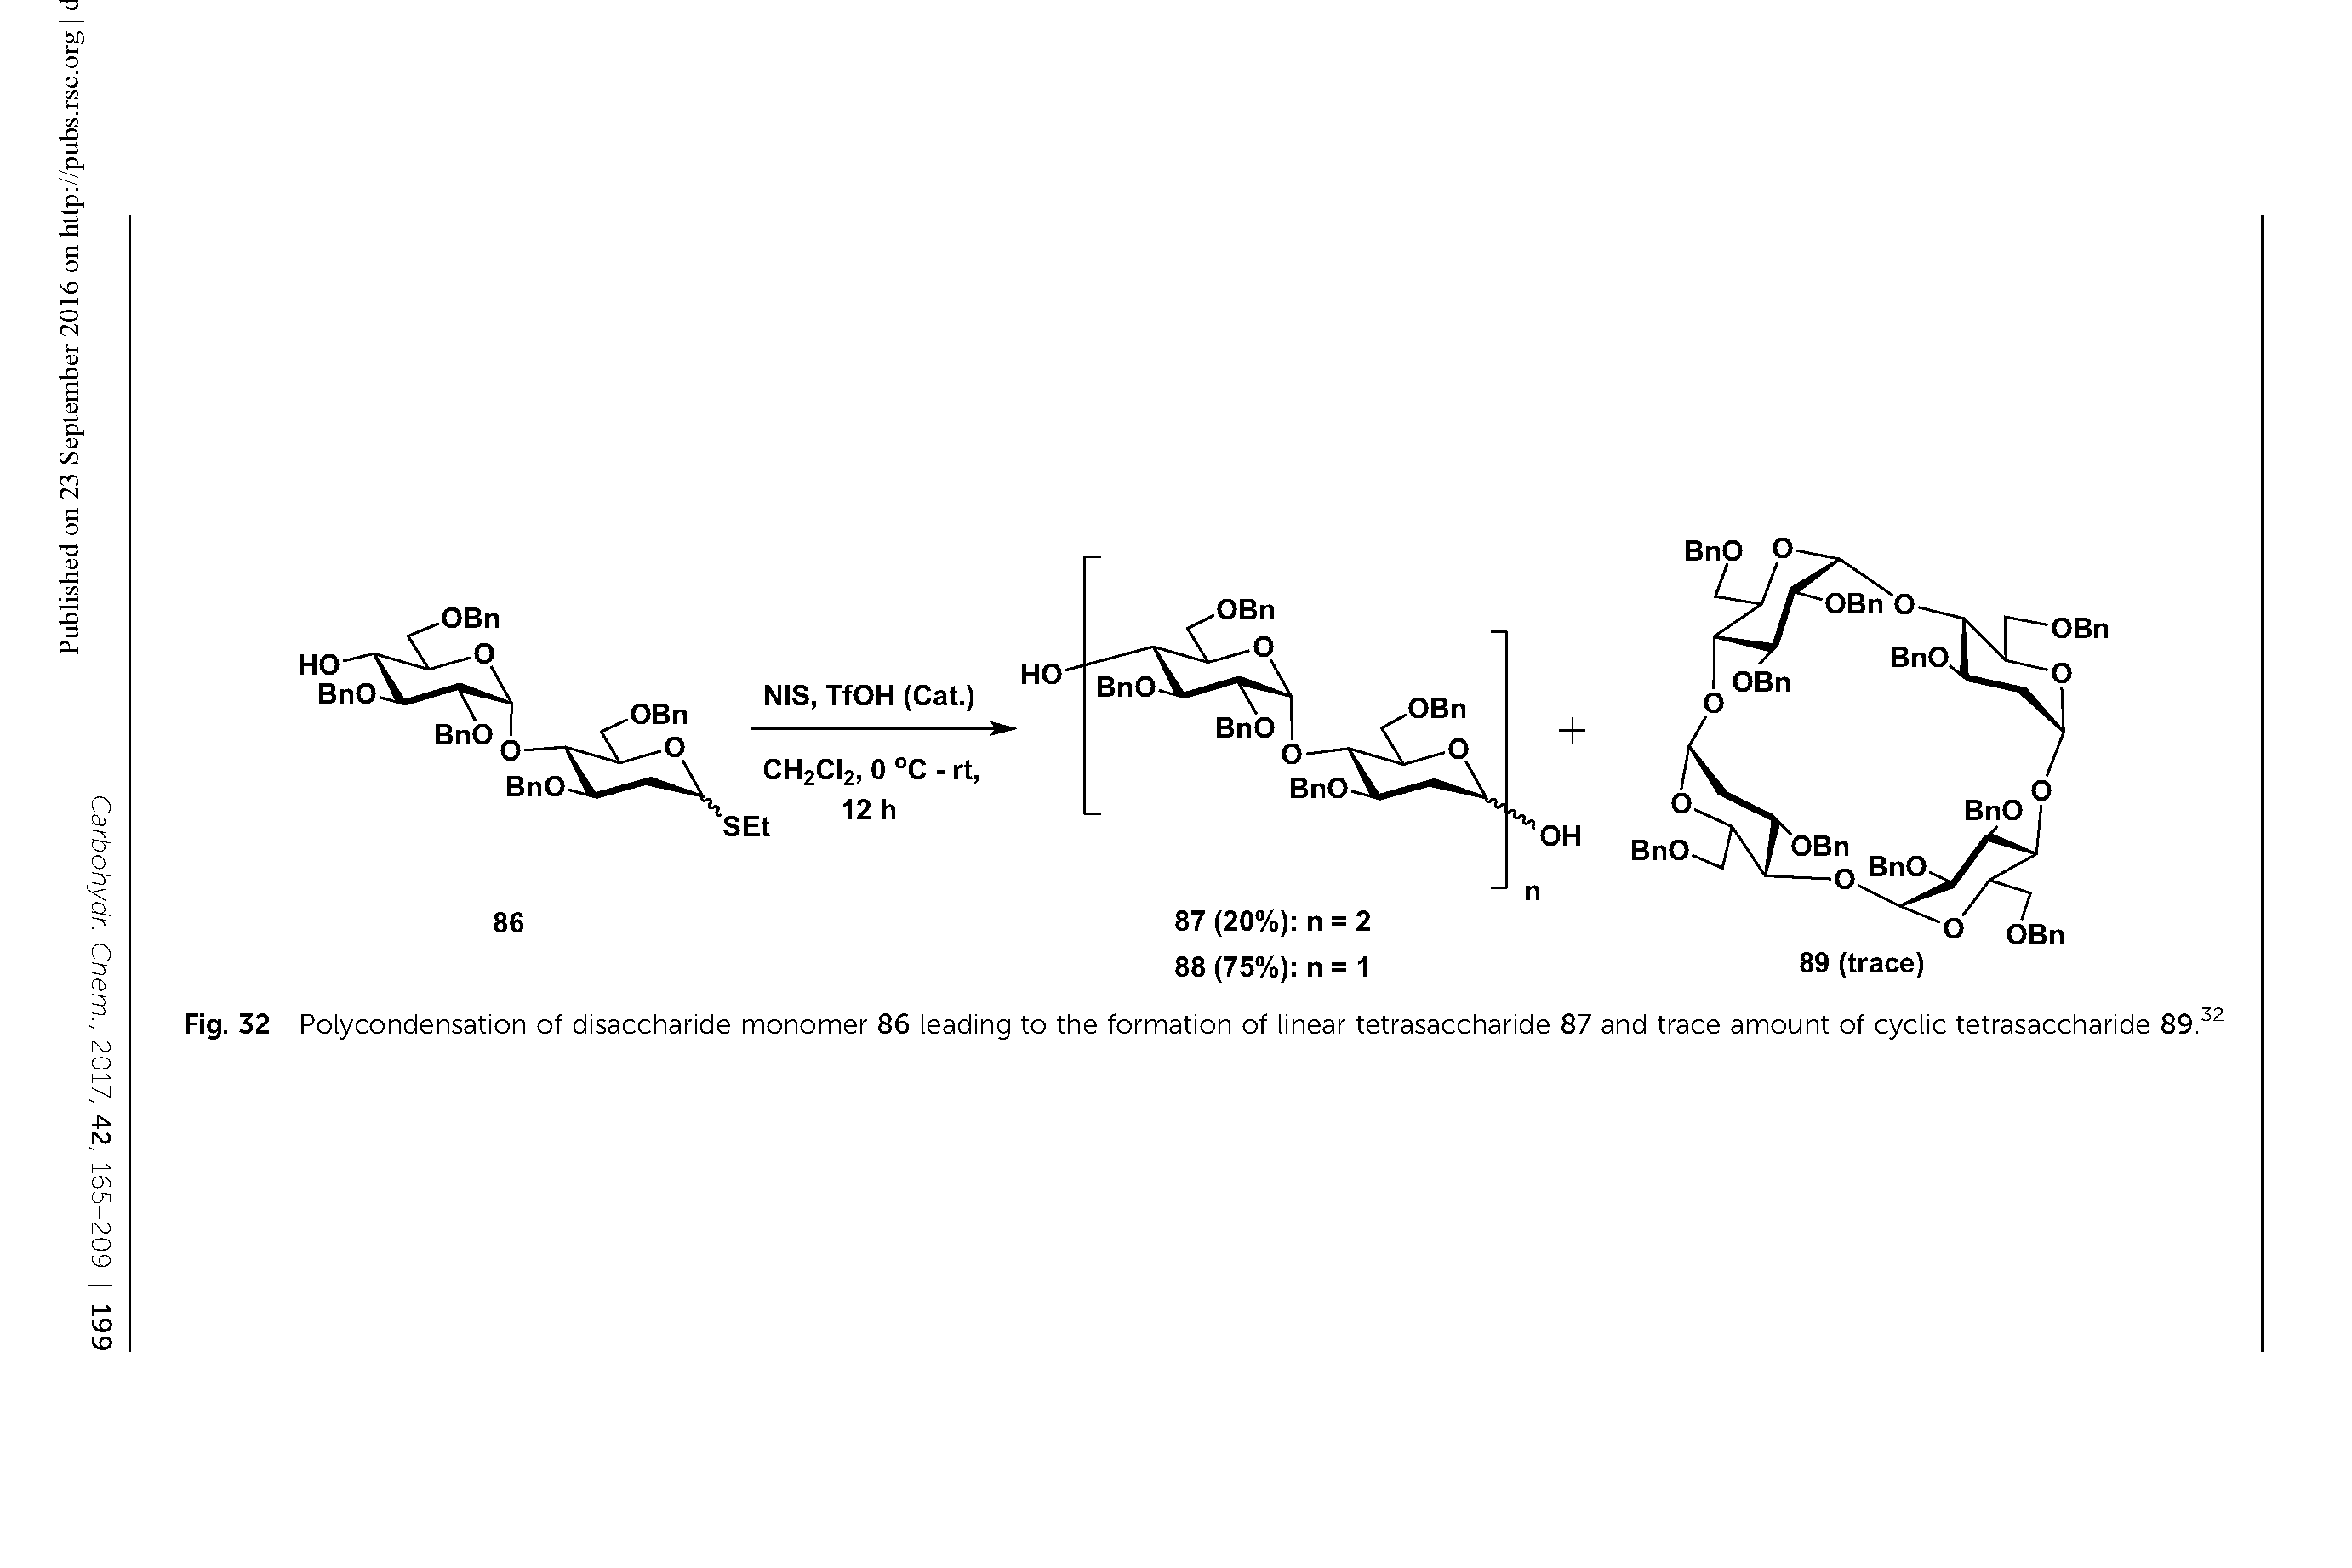 Fig. 32 Polycondensation of disaccharide monomer 86 leading to the formation of linear tetrasaccharide 87 and trace amount of cyclic tetrasaccharide 89. ...